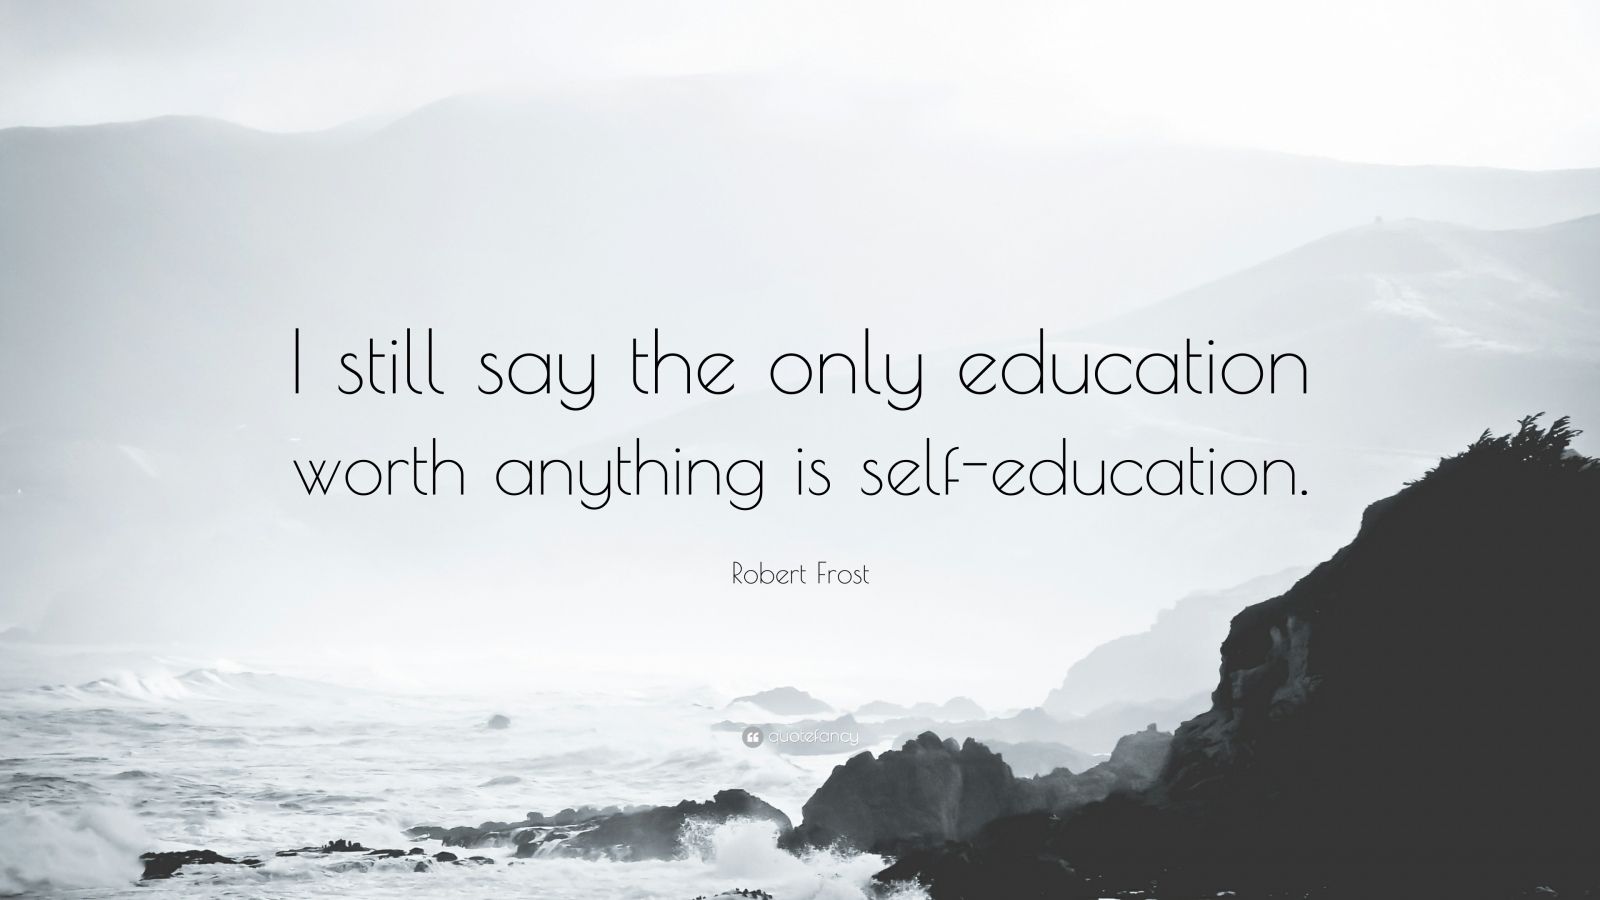 Robert Frost Quote: “I still say the only education worth anything is ...